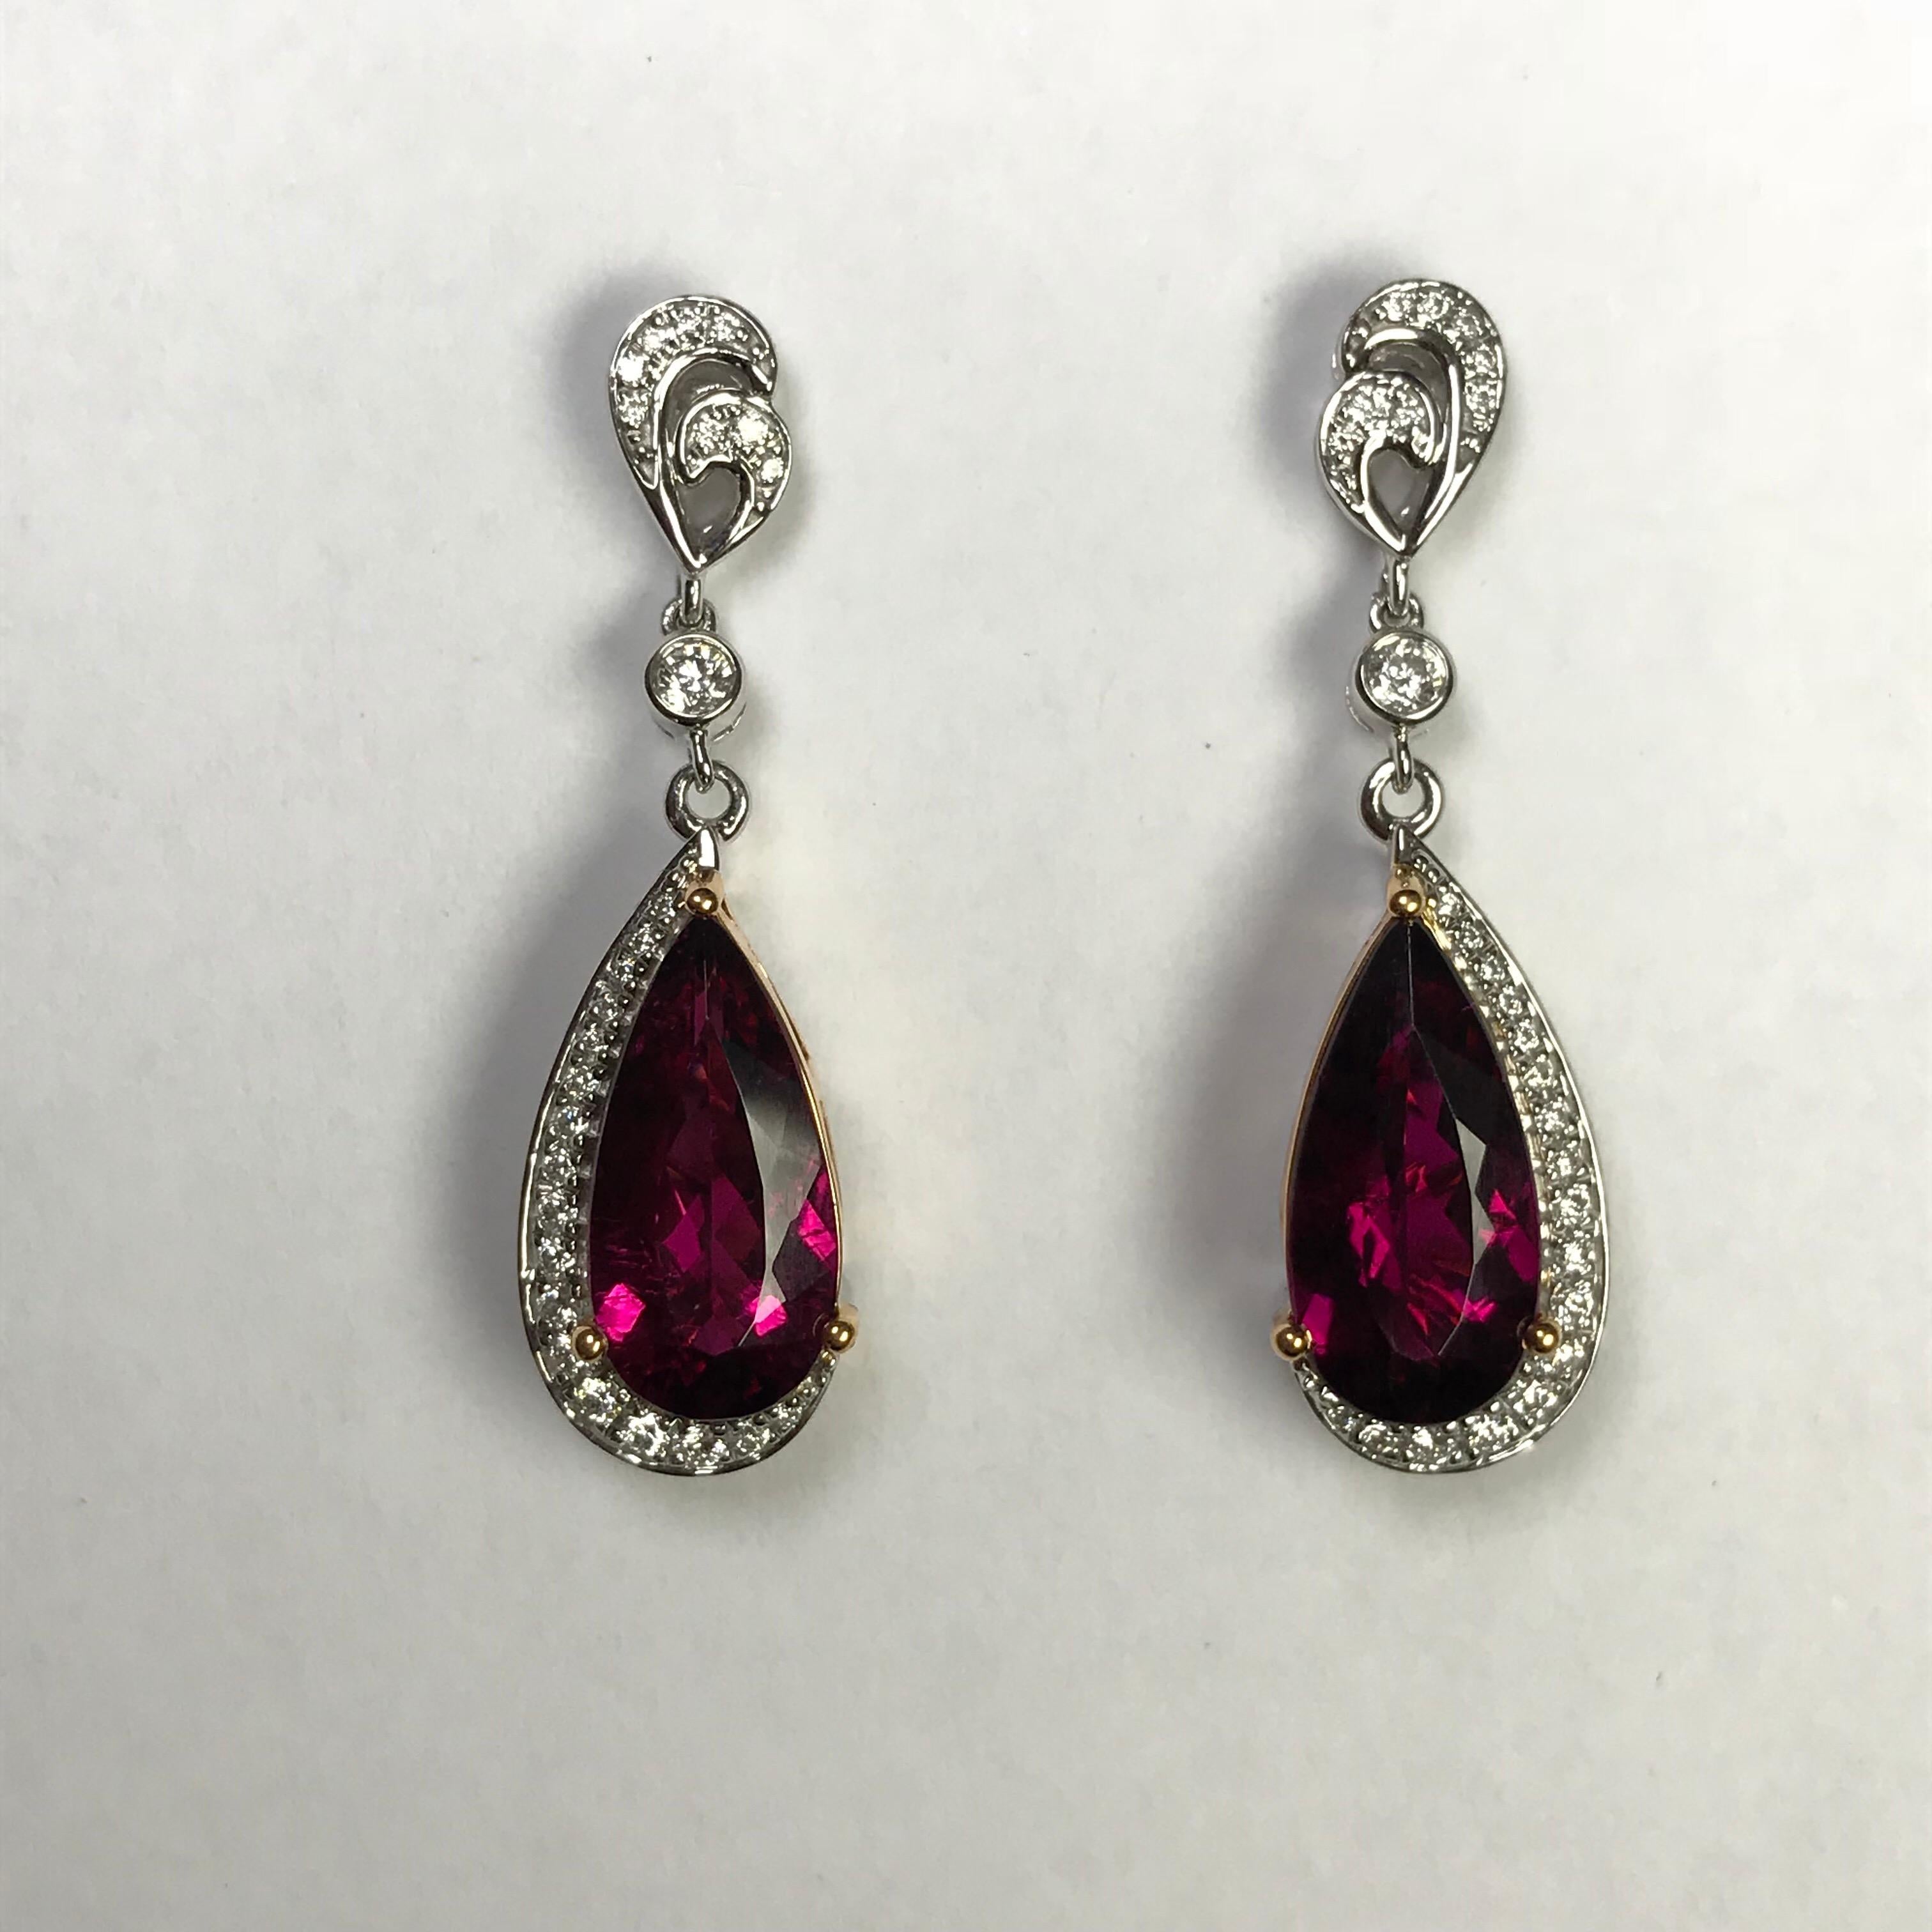 Double-pear stylized heart motifs suspend pear-shaped rubellite tourmalines that are cradled within hook-shaped frames of diamond. The tourmalines are set with rose gold prongs and mountings to strengthening the illusion that only the partial frames